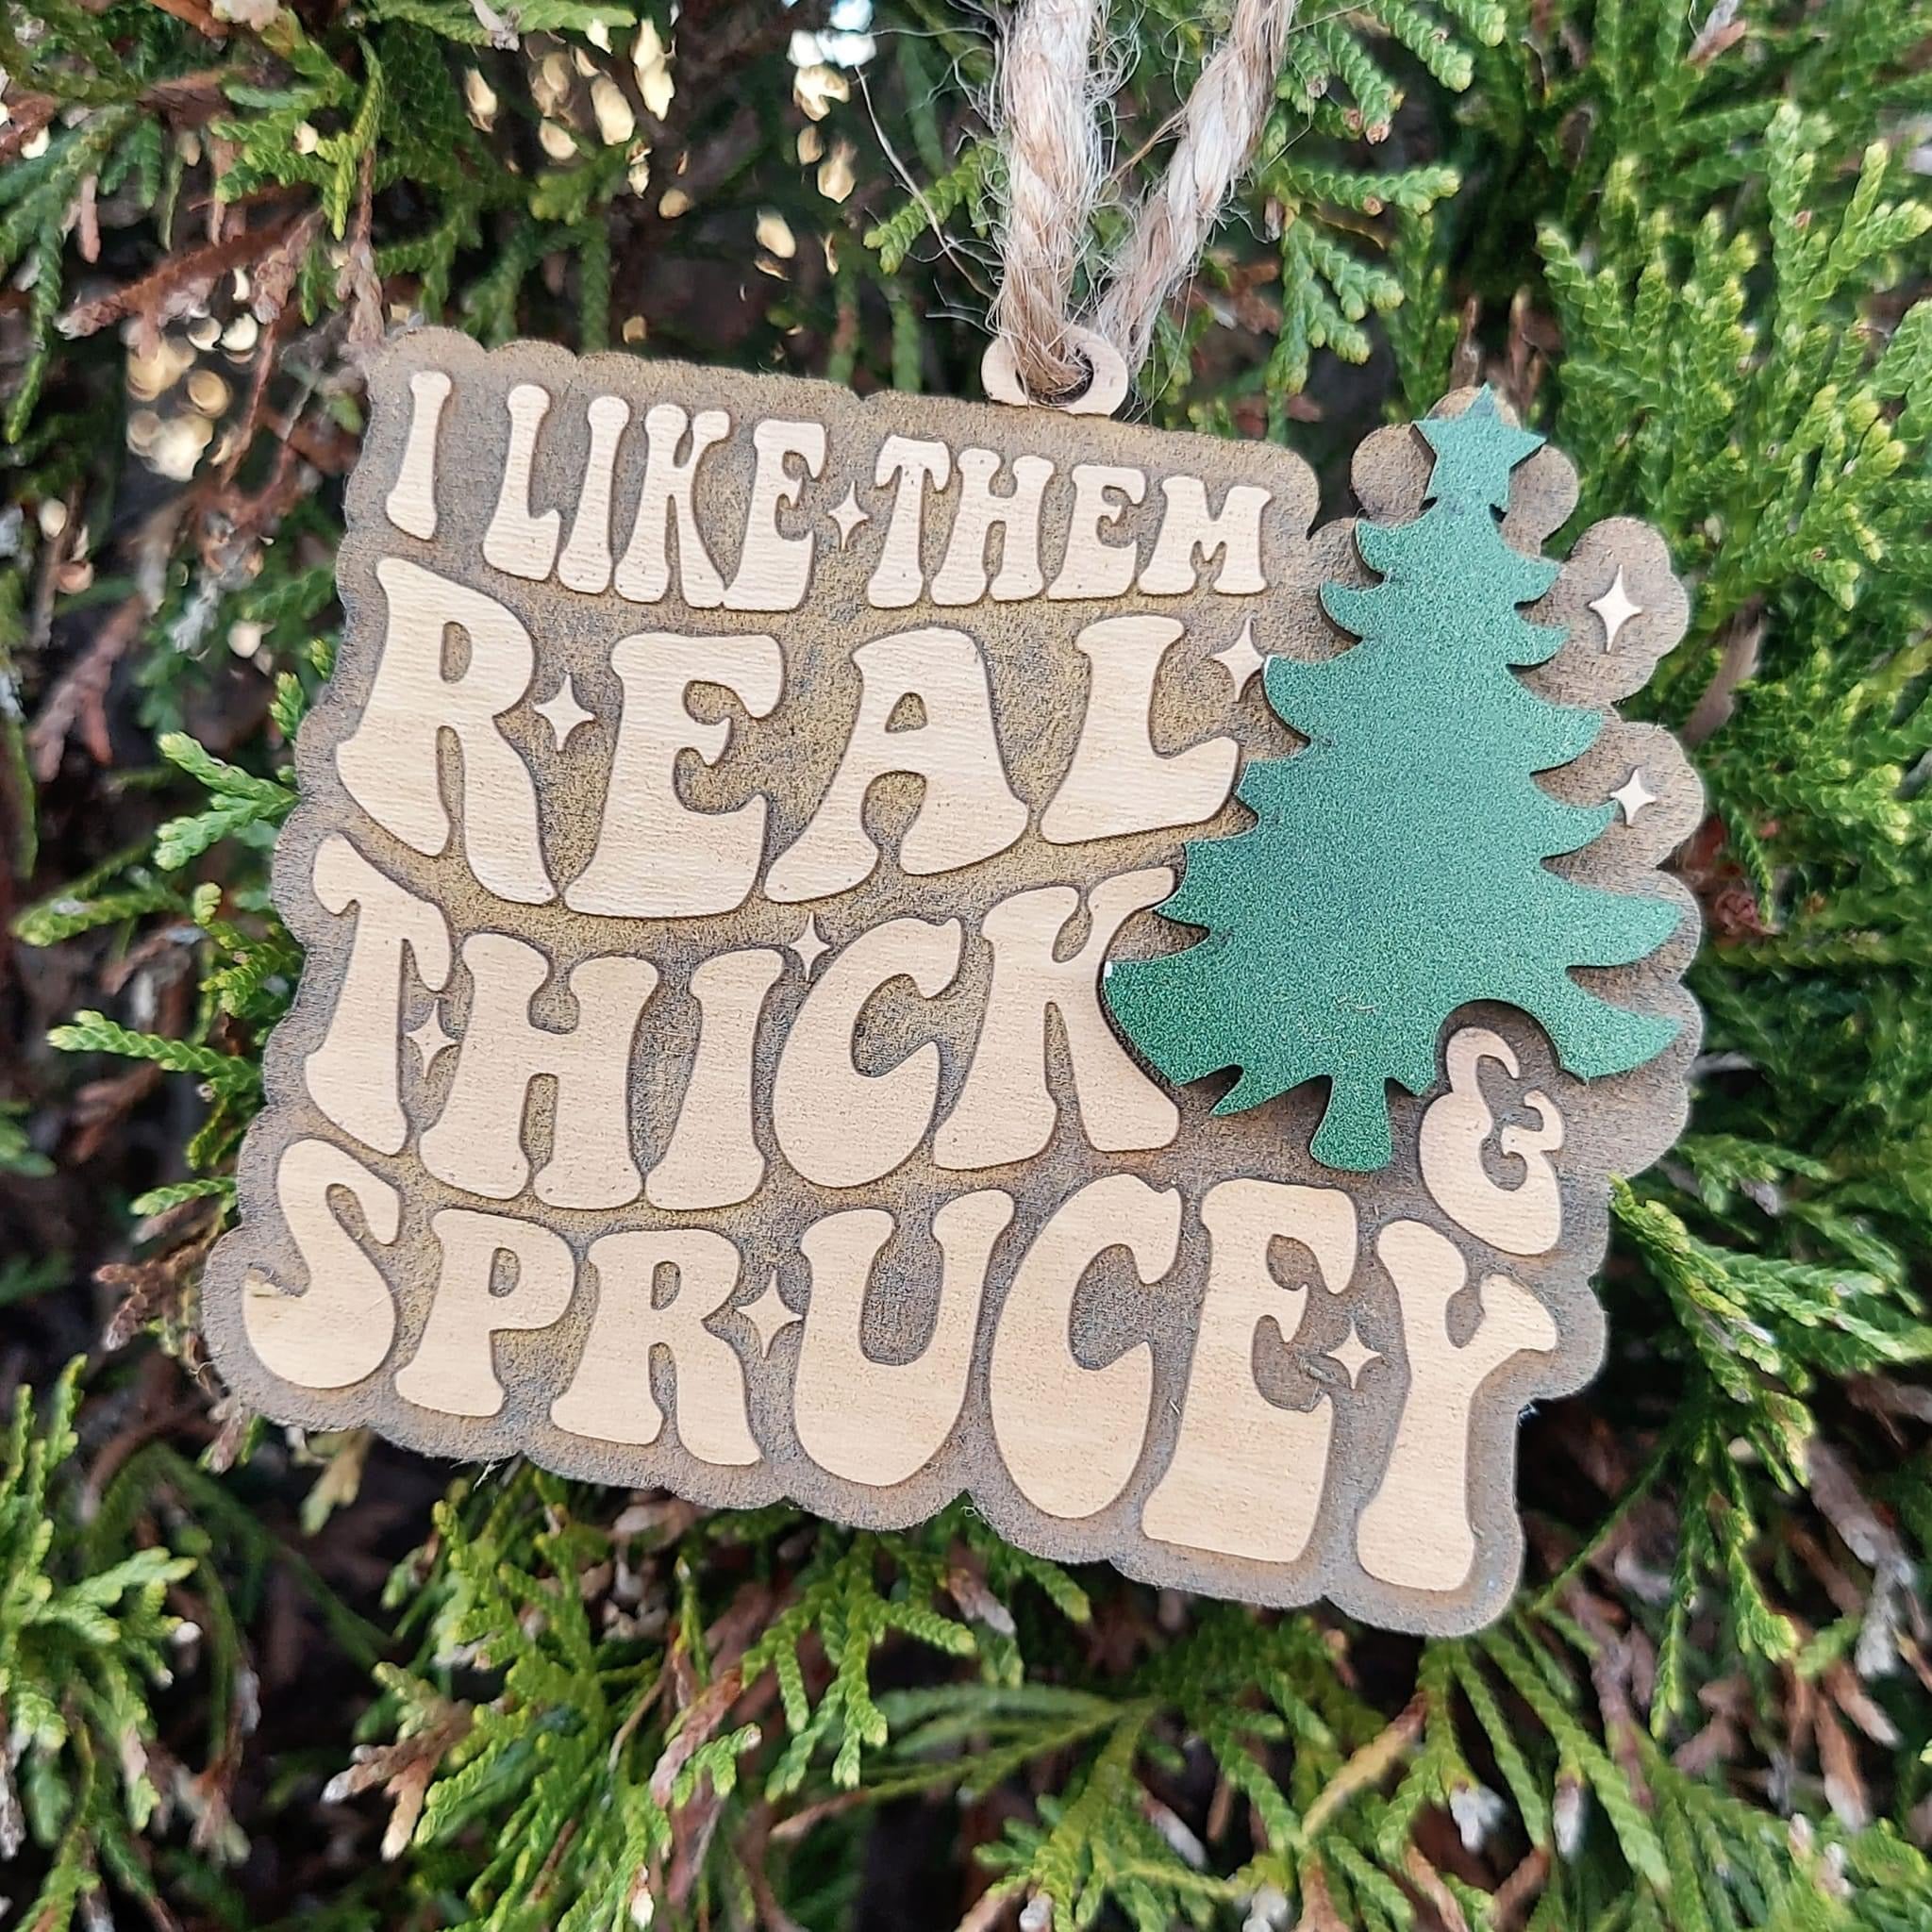 Thick and Sprucey ornament